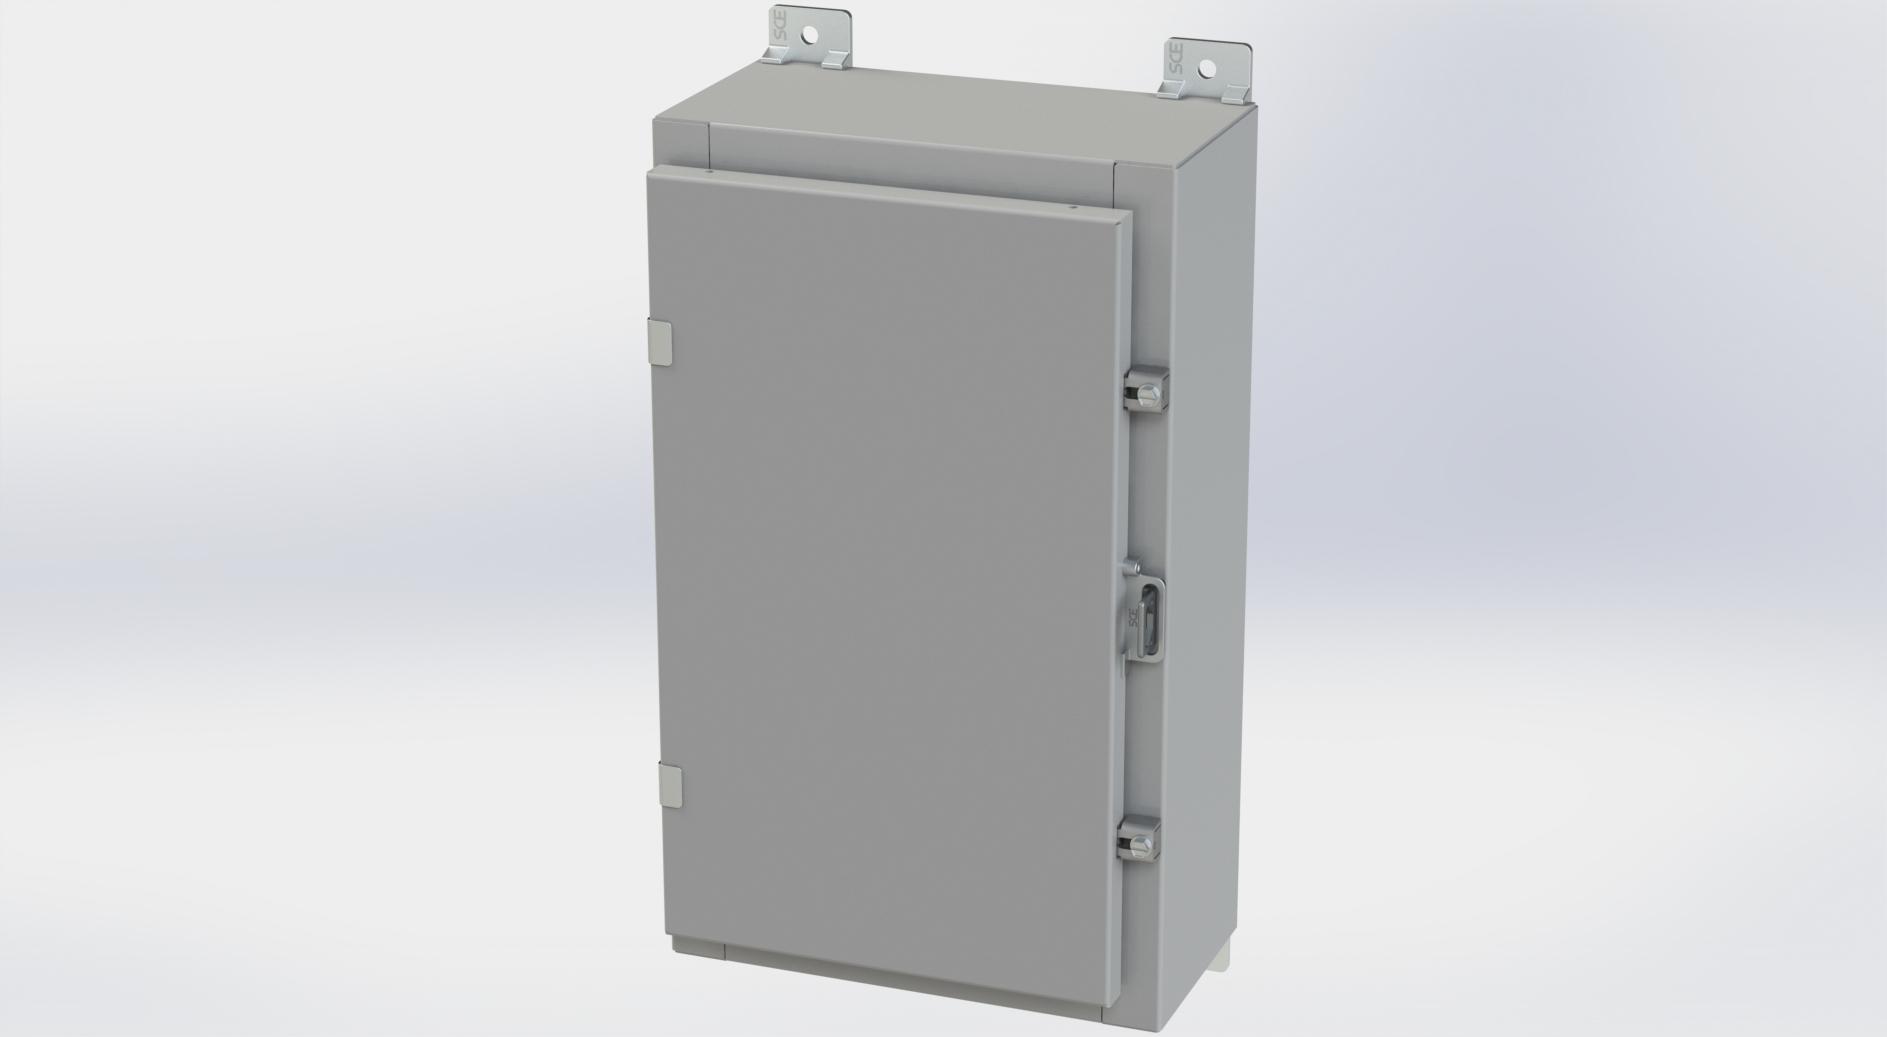 Saginaw Control SCE-20H1206LP Nema 4 LP Enclosure, Height:20.00", Width:12.00", Depth:6.00", ANSI-61 gray powder coating inside and out. Optional panels are powder coated white.